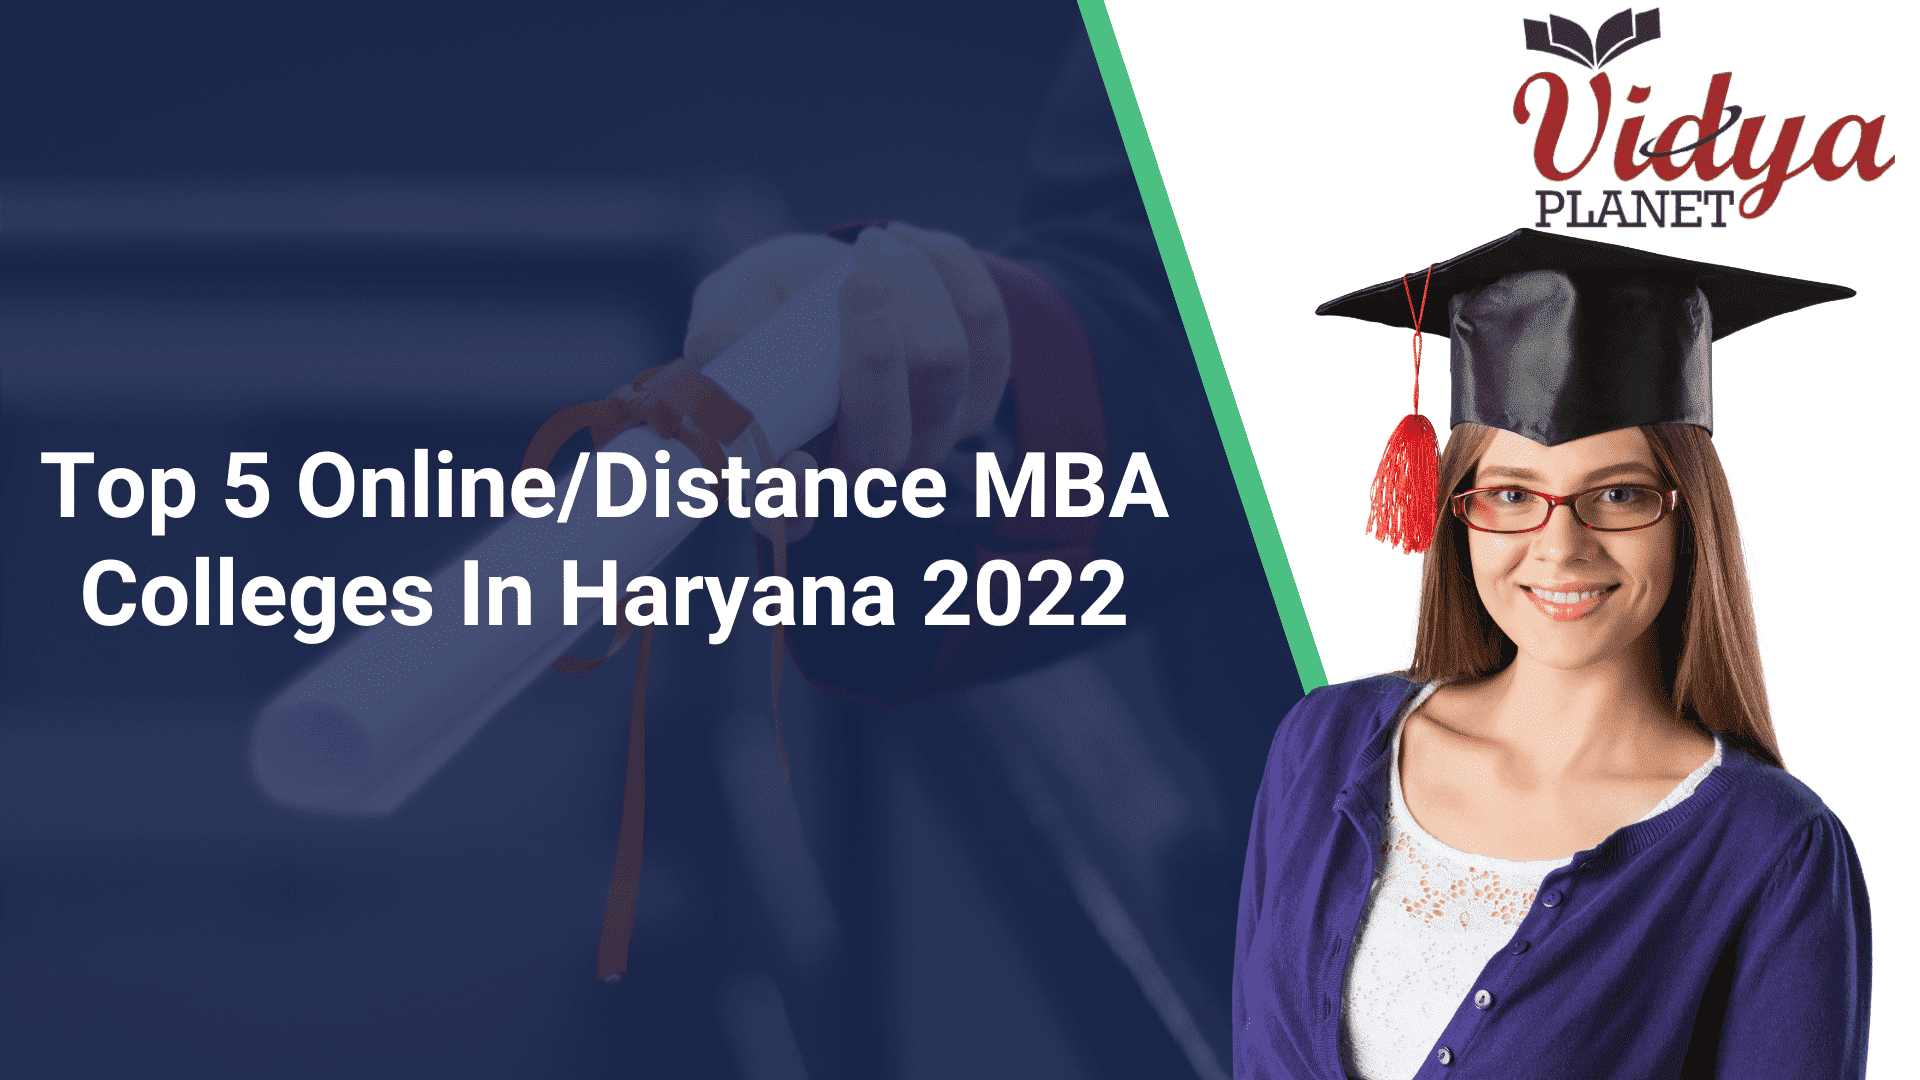 Top 5 Online/Distance MBA Colleges In Haryana 2022